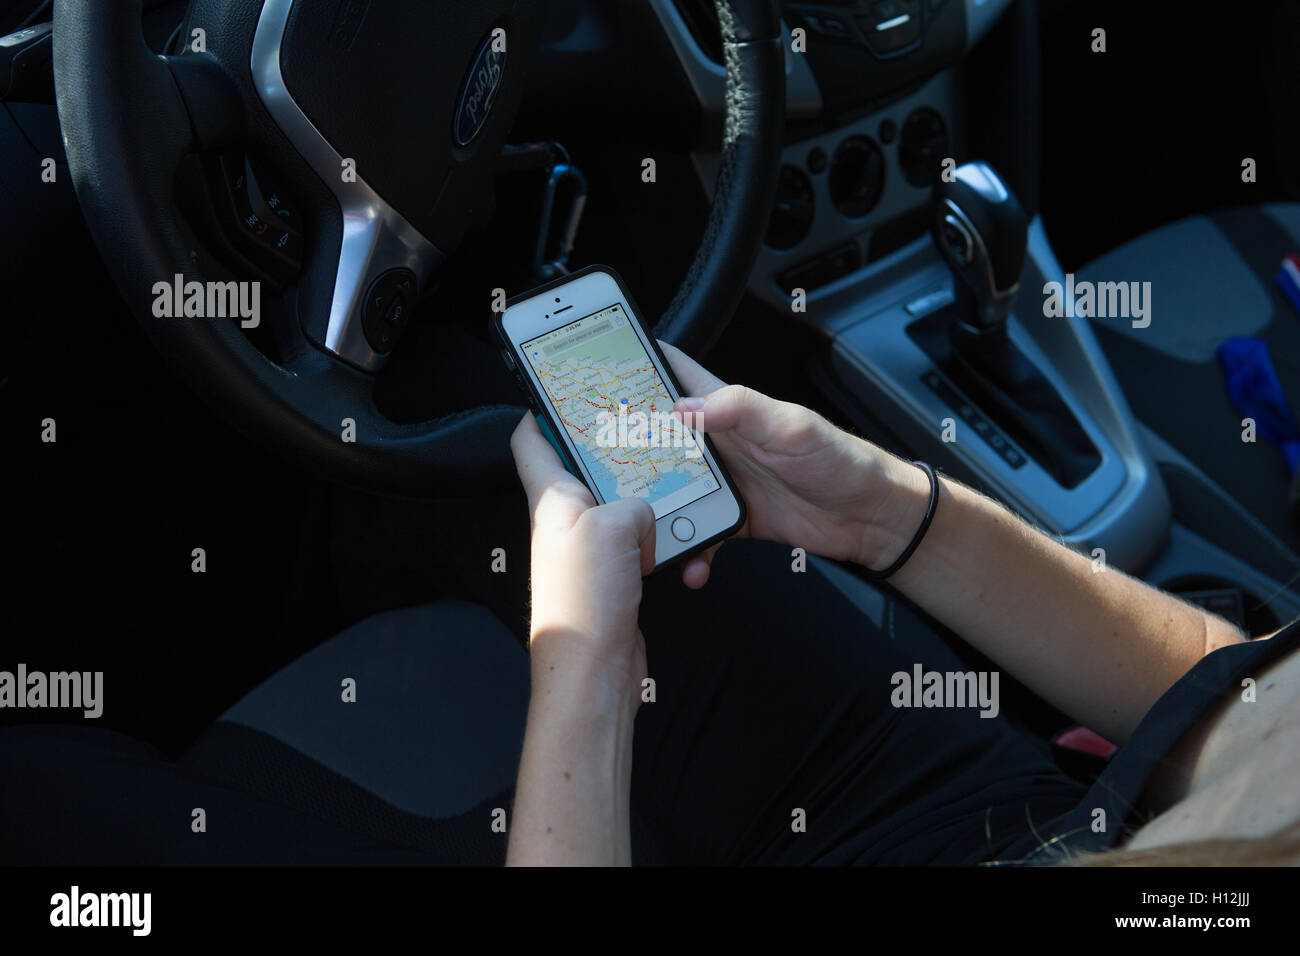 Young woman in her car using her i Phone 5s to check driving directions Stock Photo